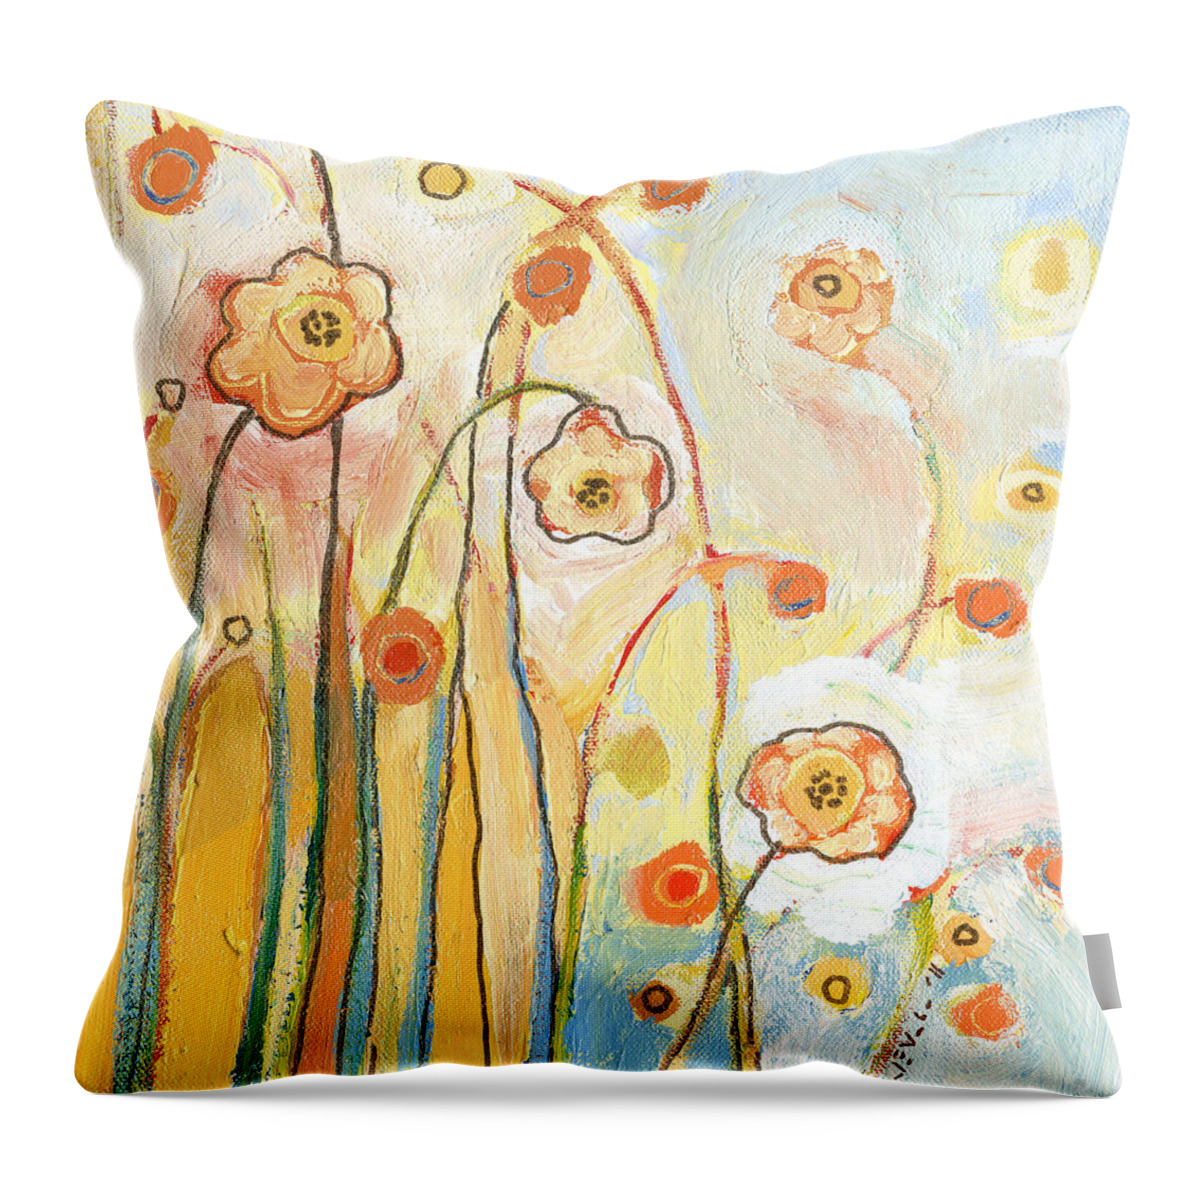 Floral Throw Pillow featuring the painting Orange Whimsy by Jennifer Lommers